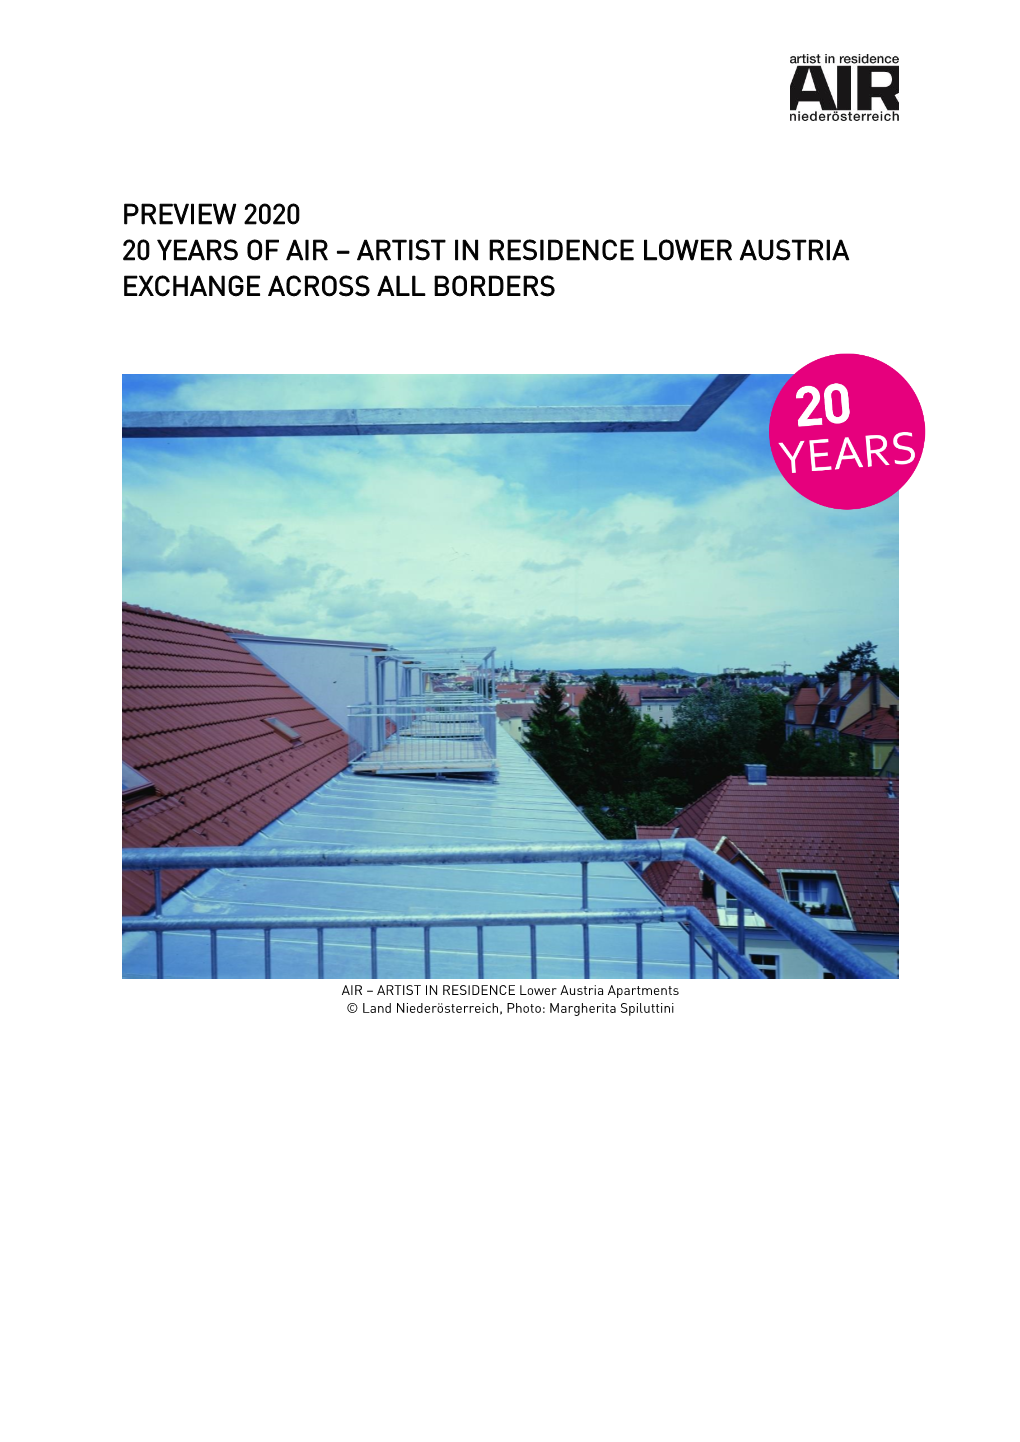 Preview 2020 20 Years of Air – Artist in Residence Lower Austria Exchange Across All Borders